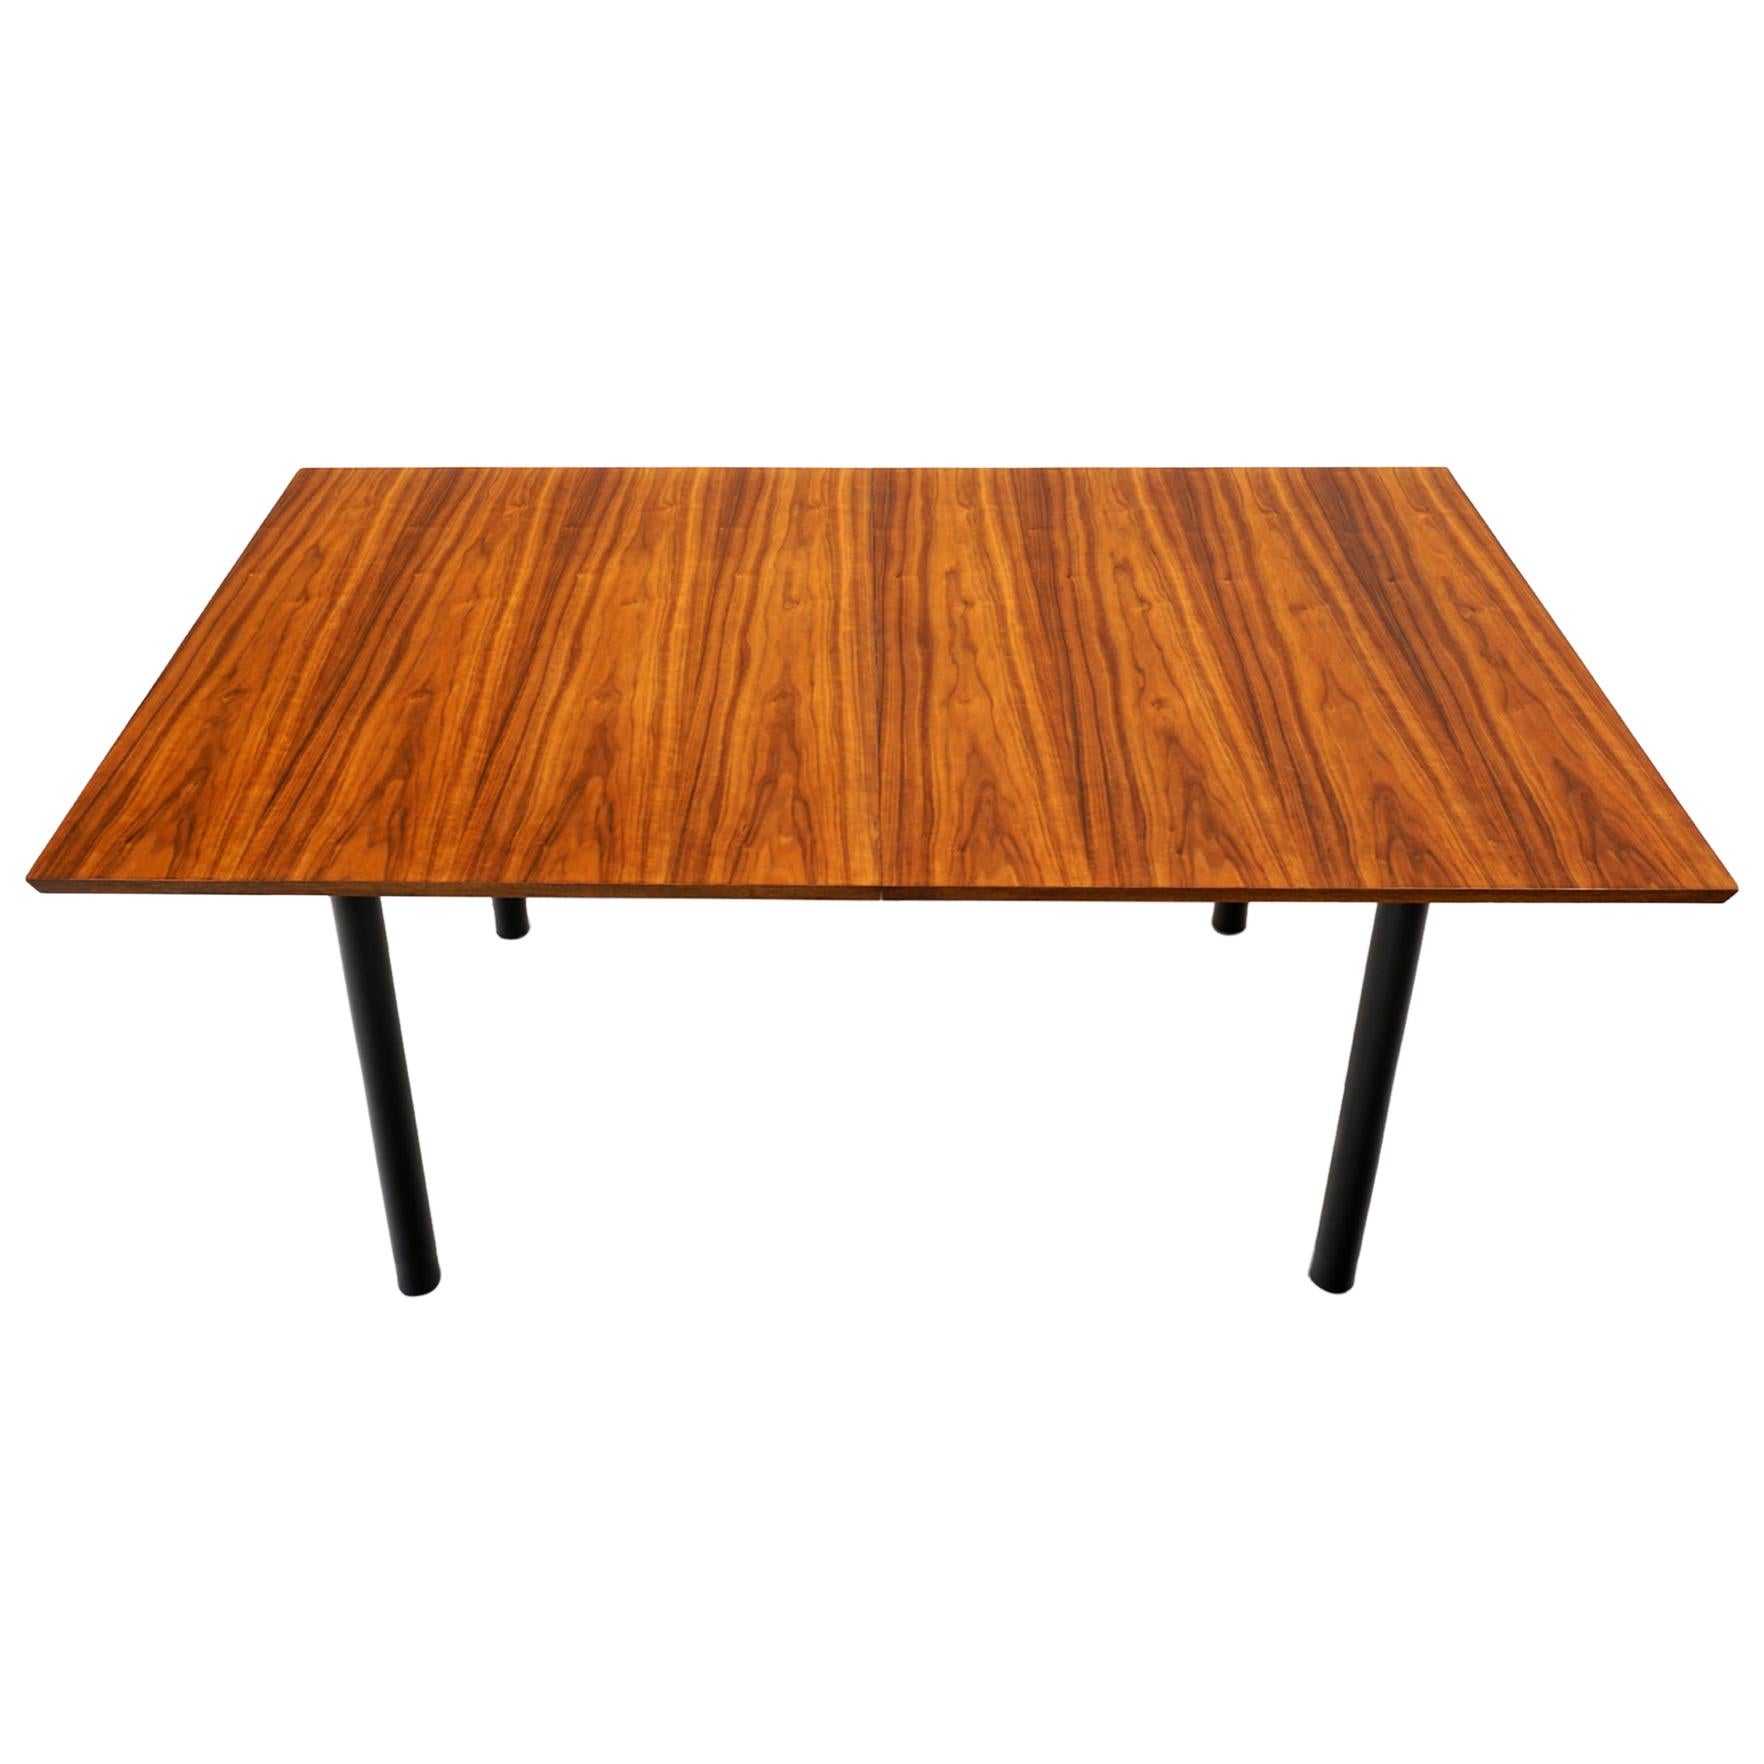 Expandable Rosewood Dining Table by Edward Wormley for Dunbar, Excellent